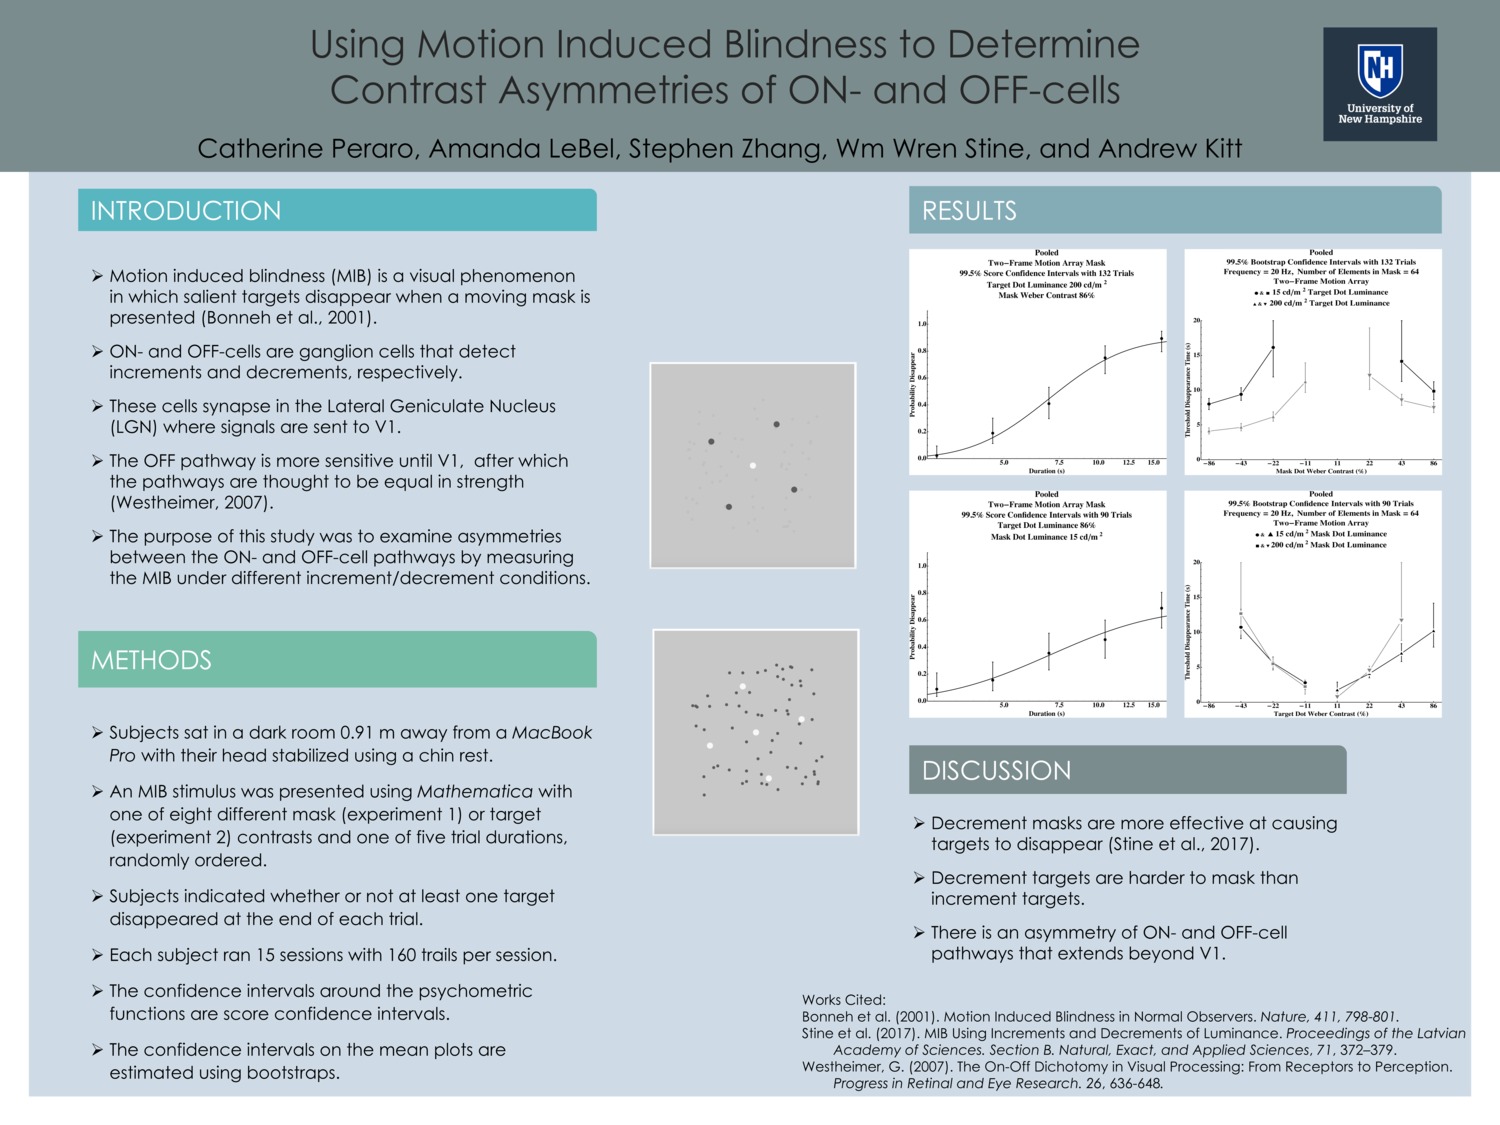 Using Motion Induced Blindness To Determine Contrast Asymmetries Of On- And Off-Cells by cmp1014